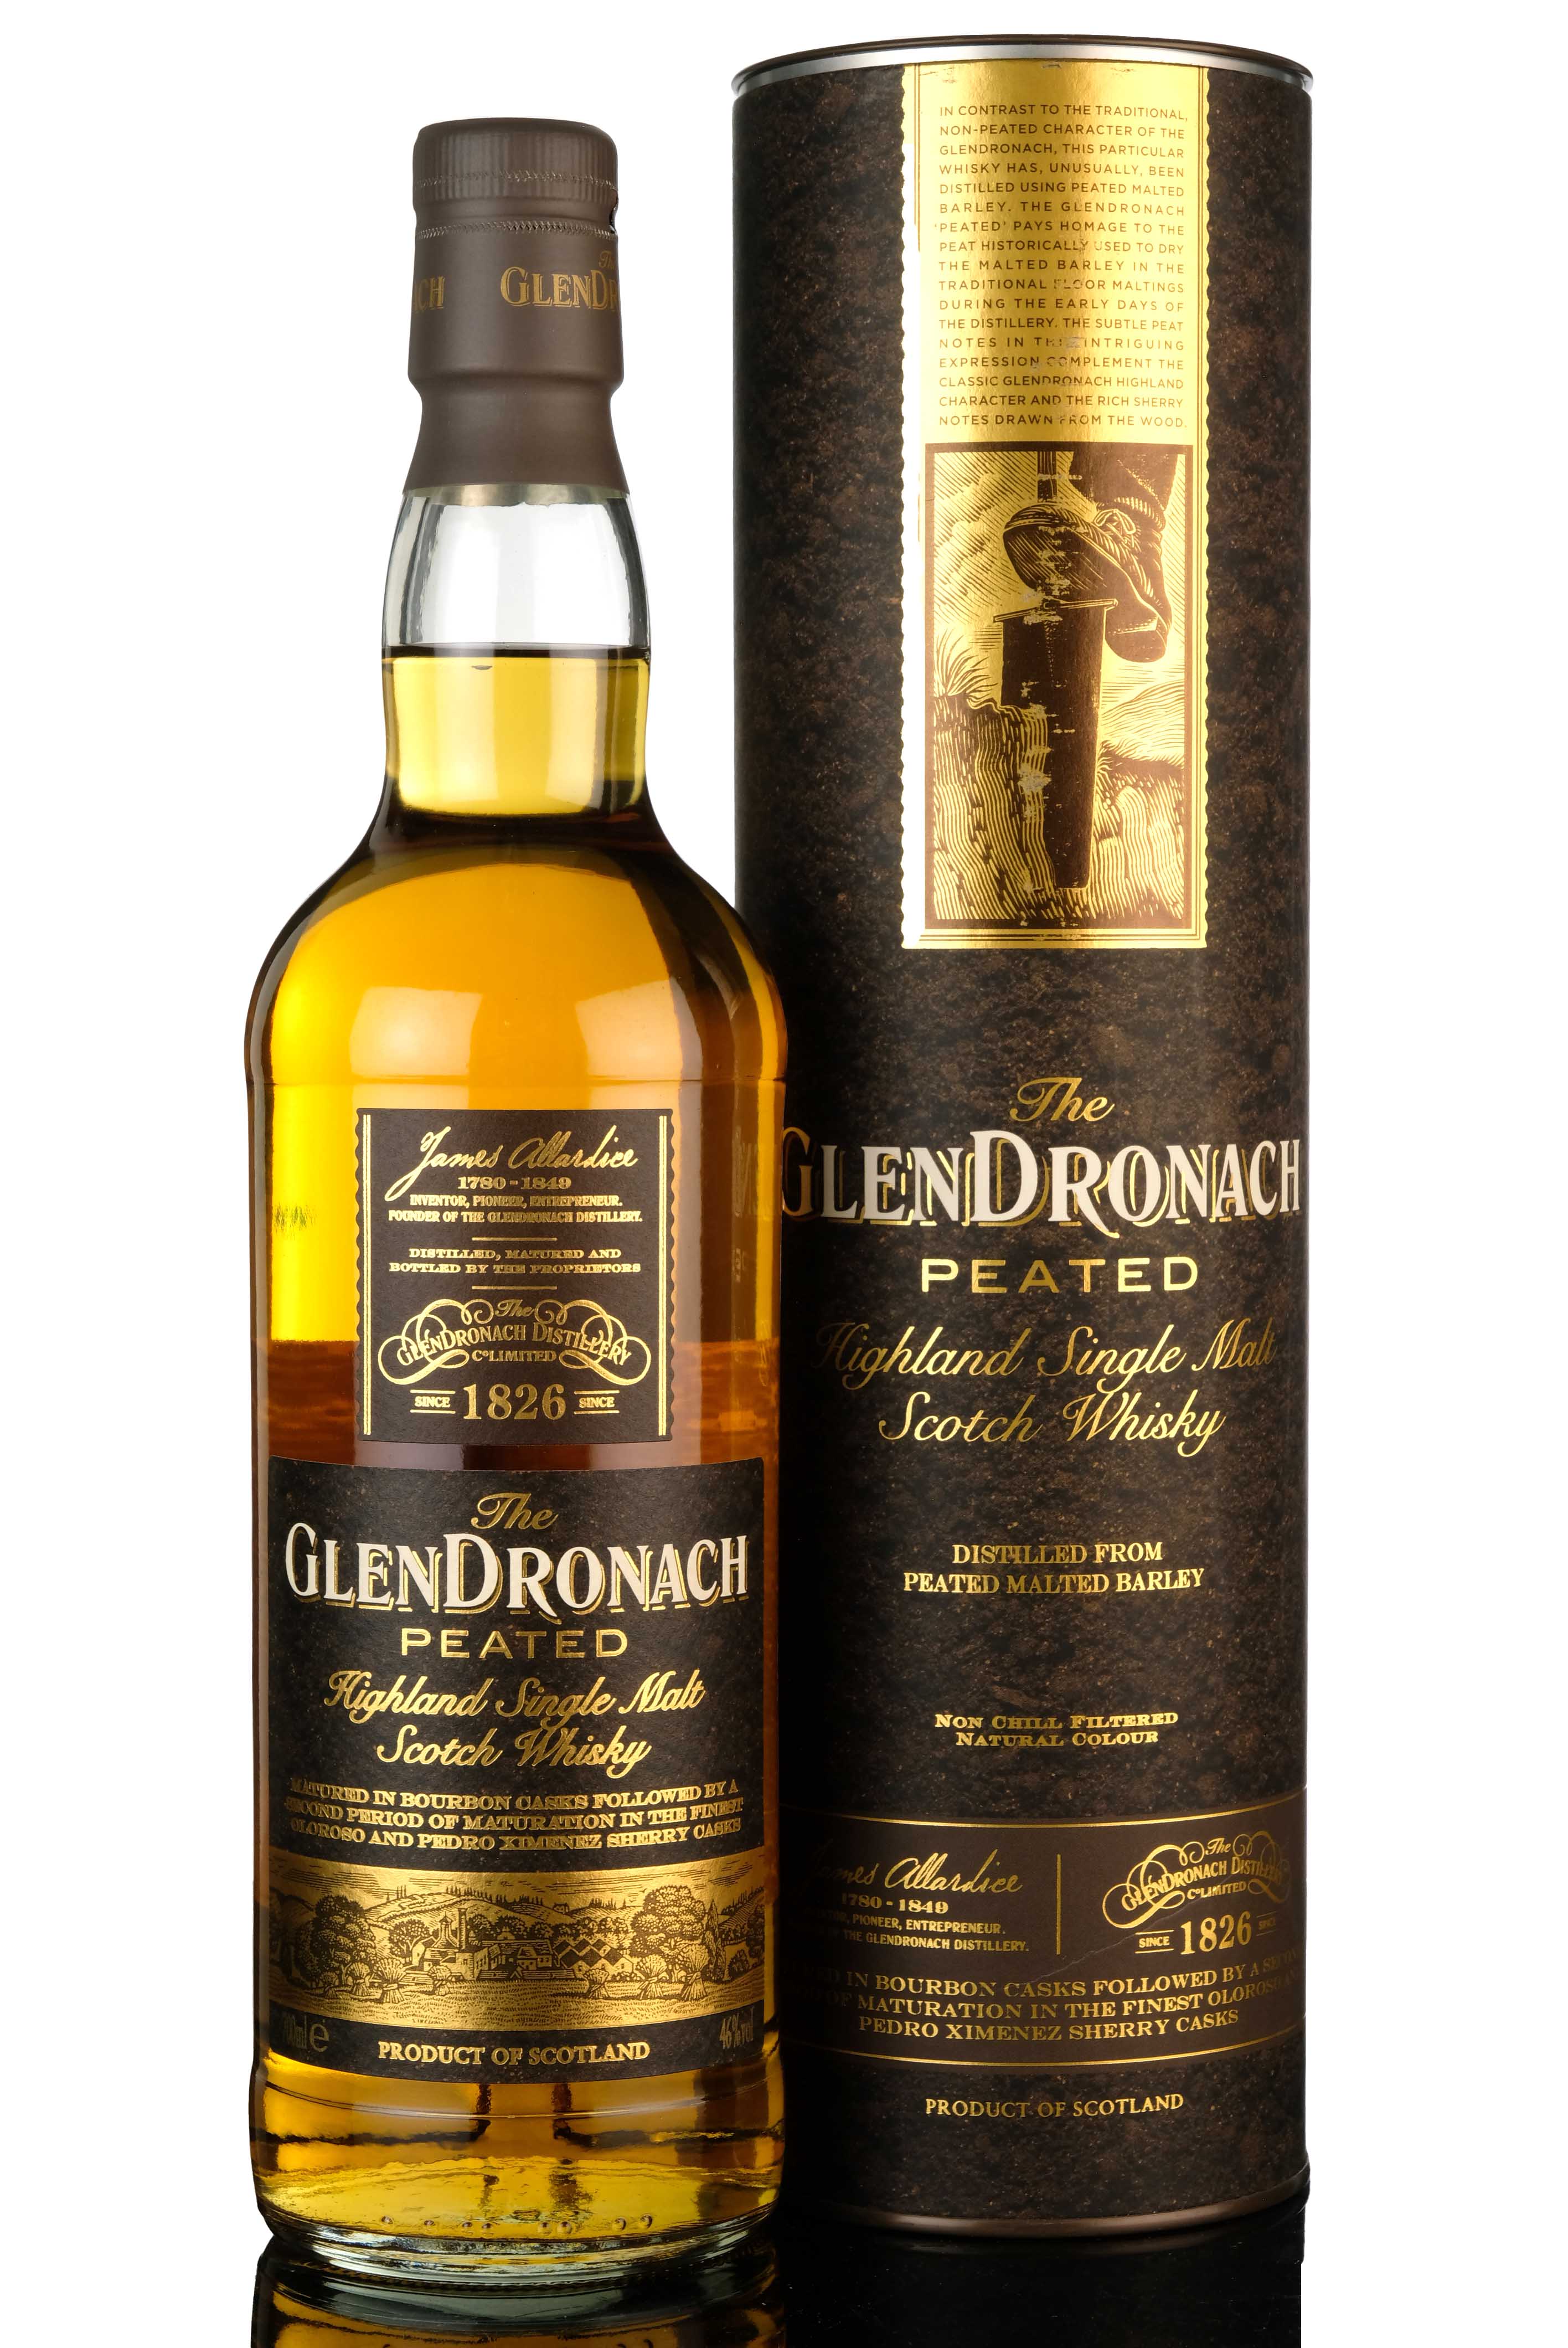 Glendronach Peated - 2015 Release